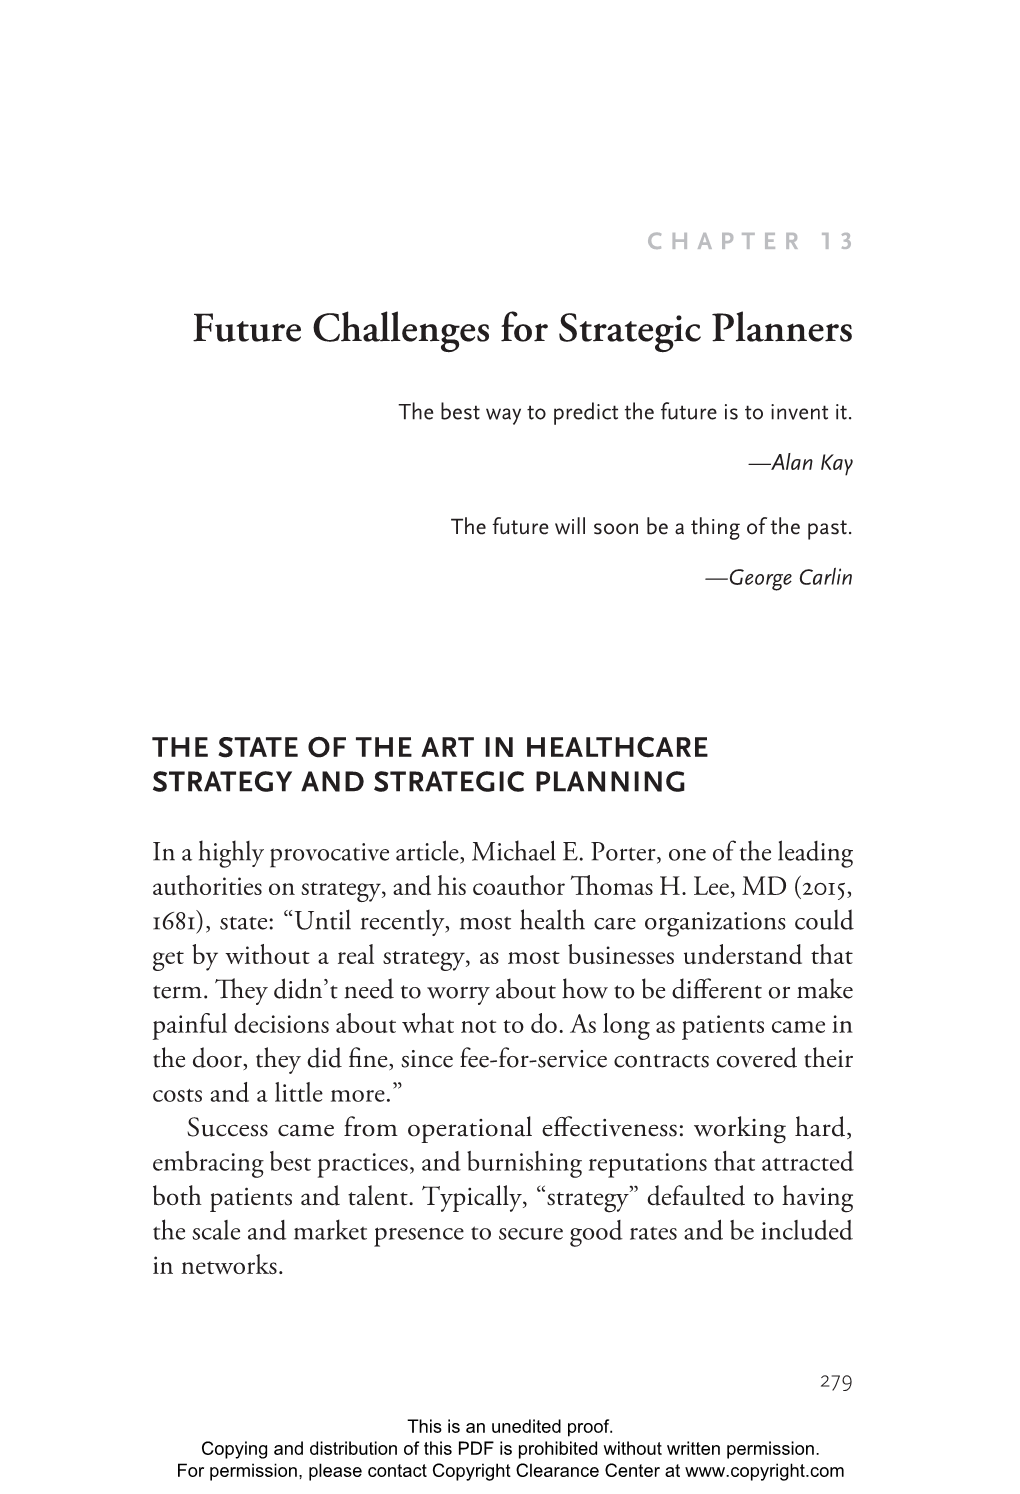 Future Challenges for Strategic Planners